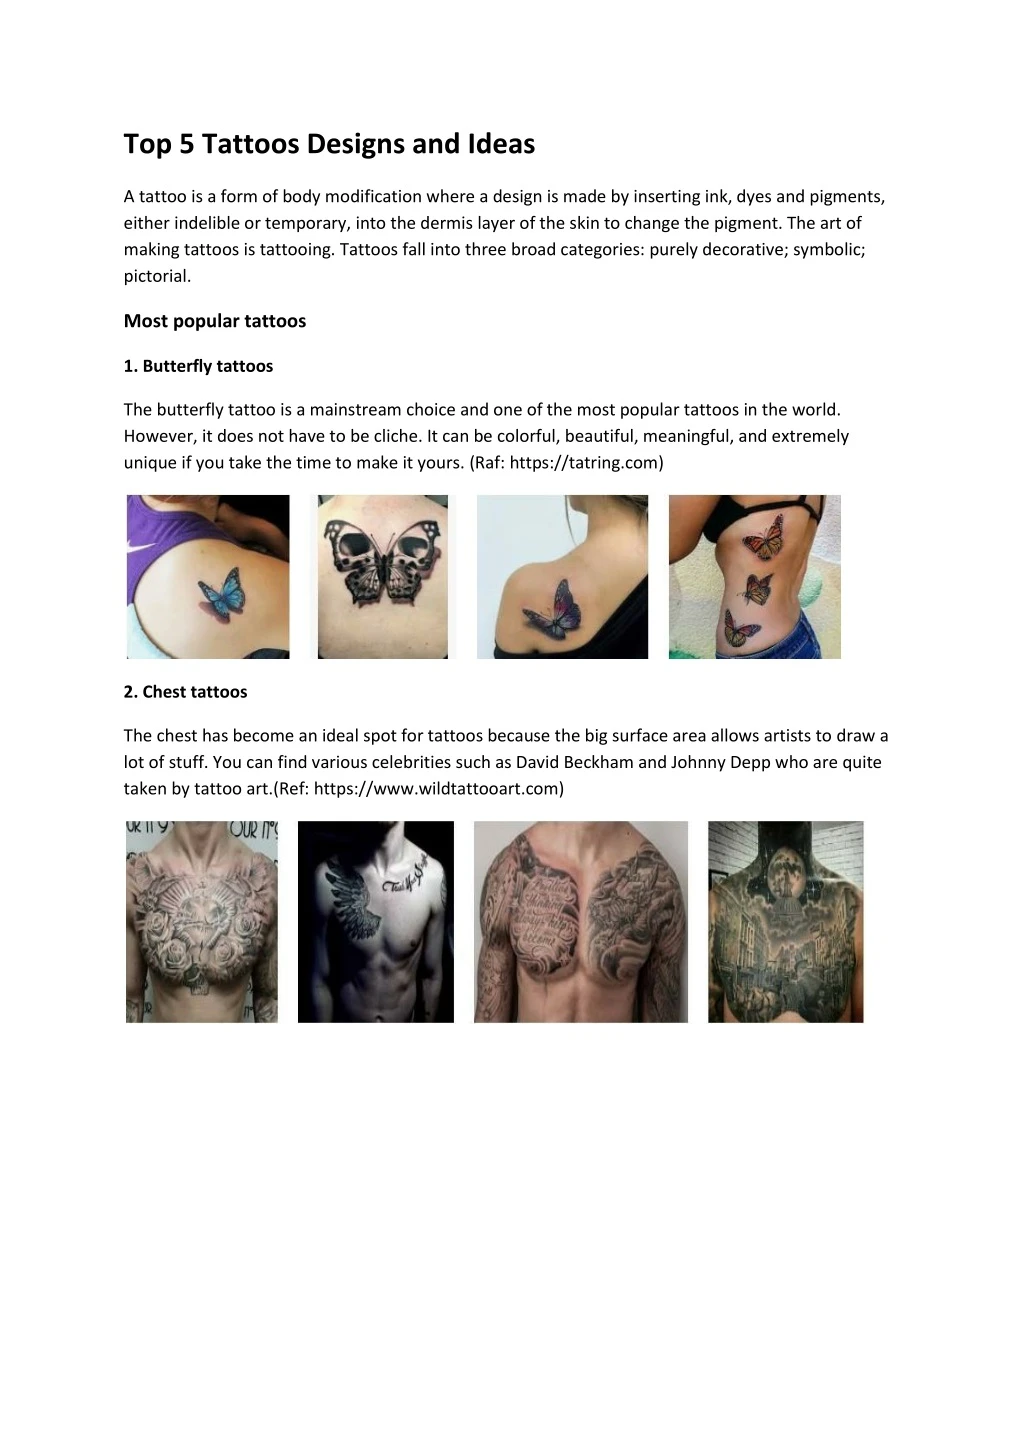 How to show a tattoo artist the tattoo I want? Can I show them a picture on  my phone of the tattoo, or do I have to print the tattoo design for